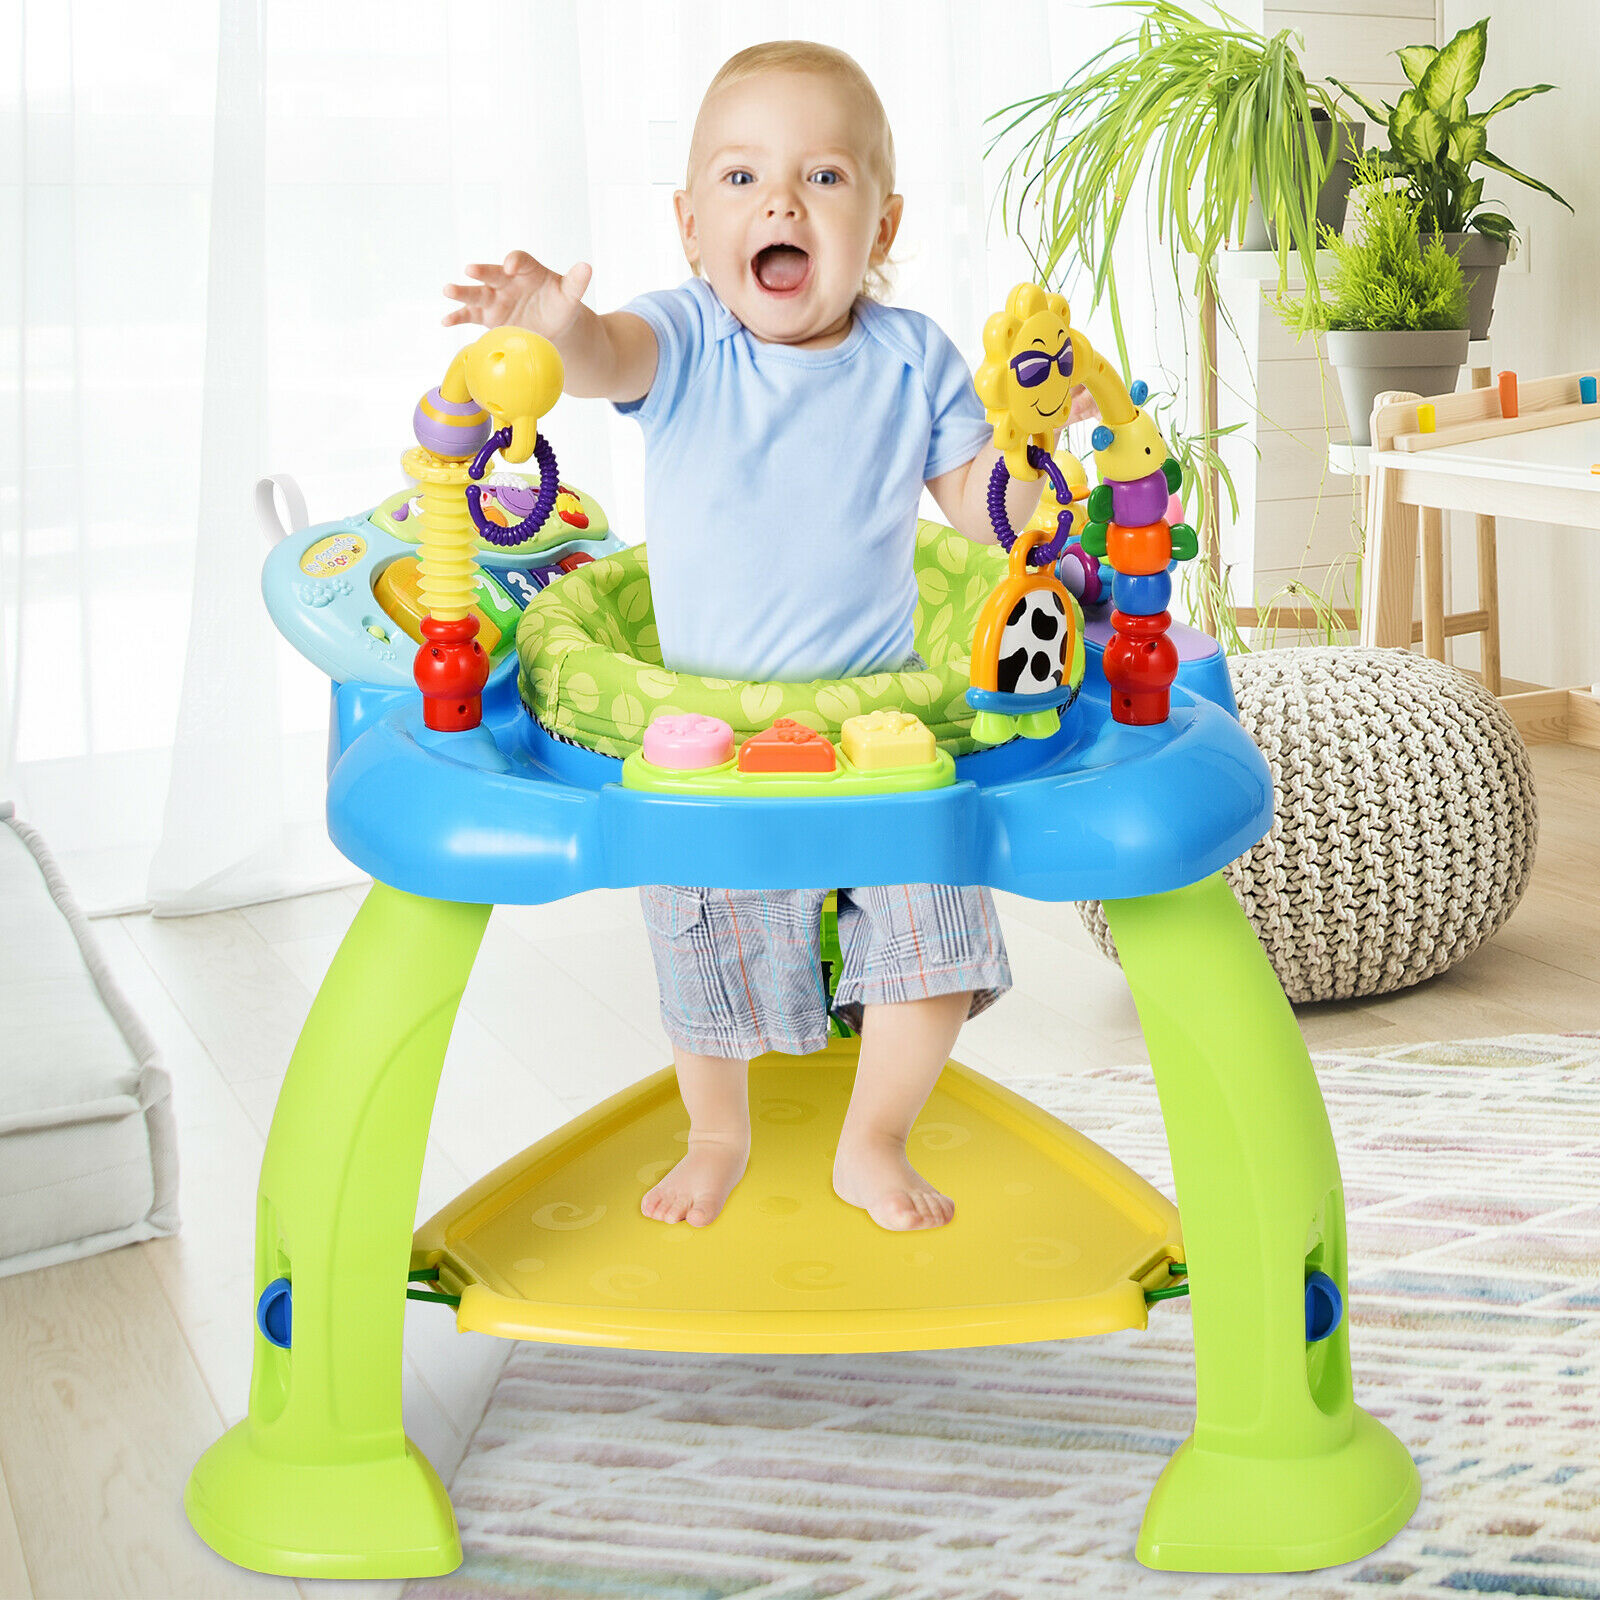 Costway Sit-to-stand Bounce Activity Center with 360 Degrees Rotating Seat for Kids